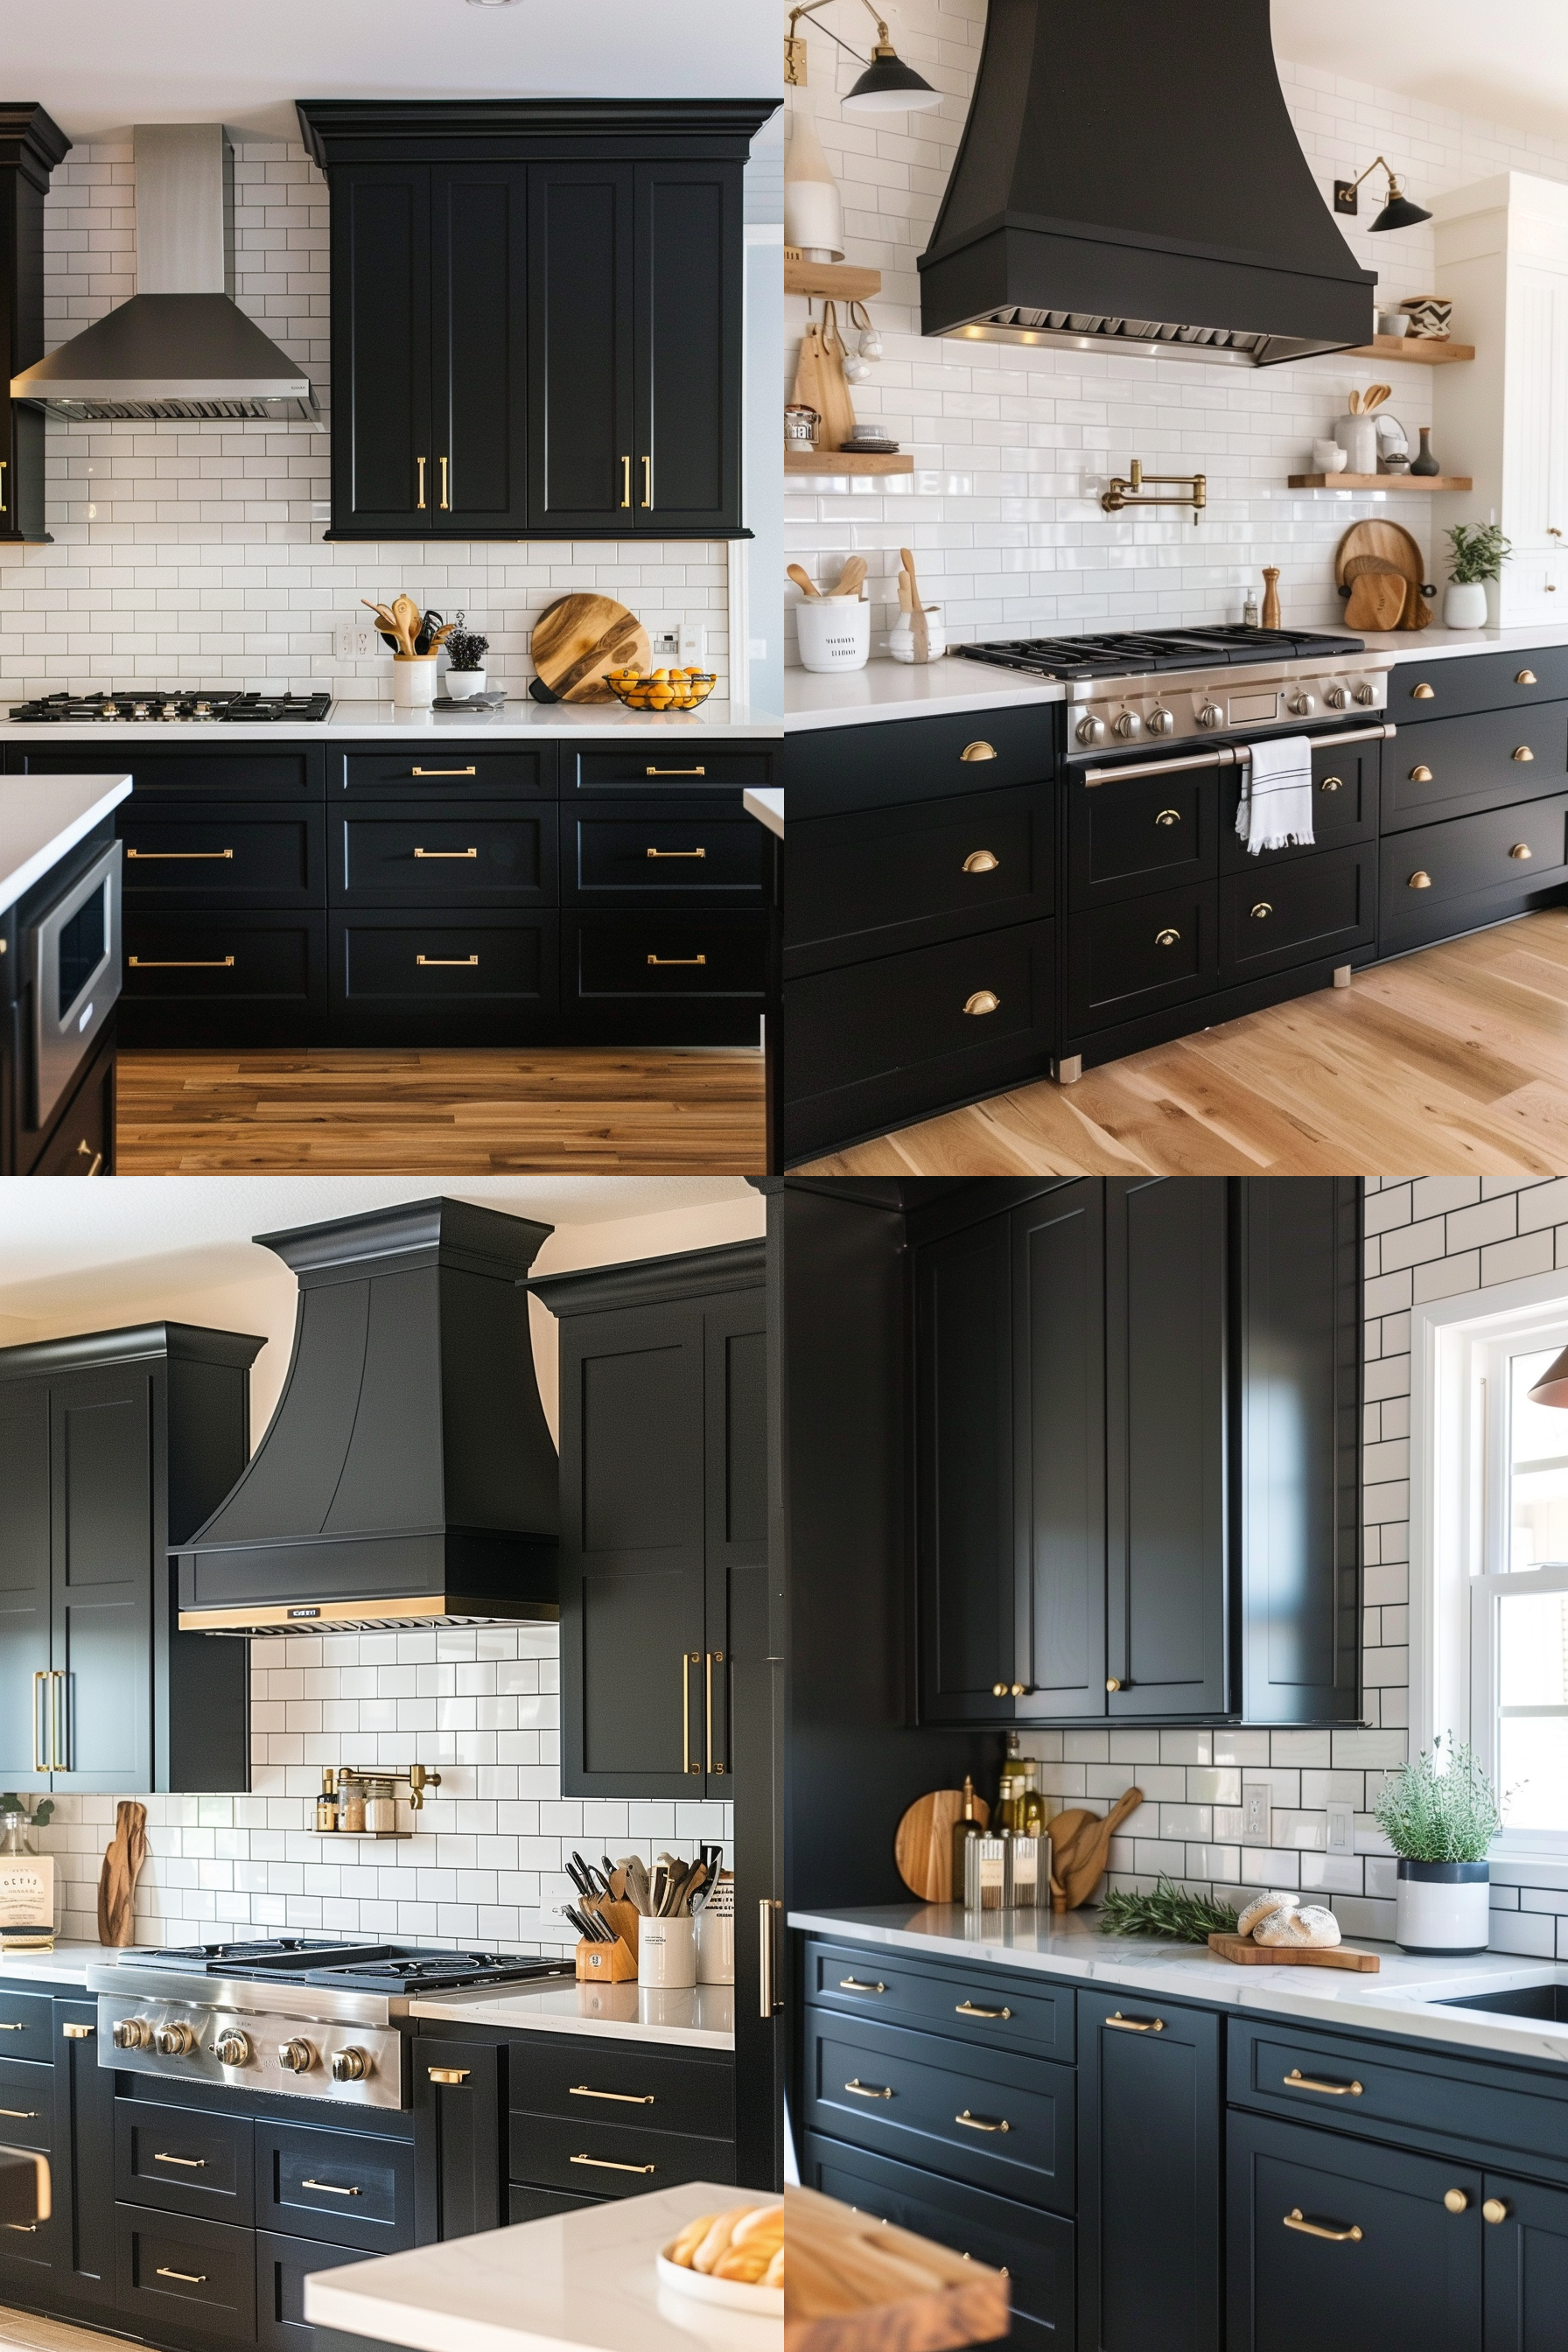 ALT text: "Modern kitchen with black cabinets, white subway tile backsplash, and stainless steel appliances, accented with brass hardware."